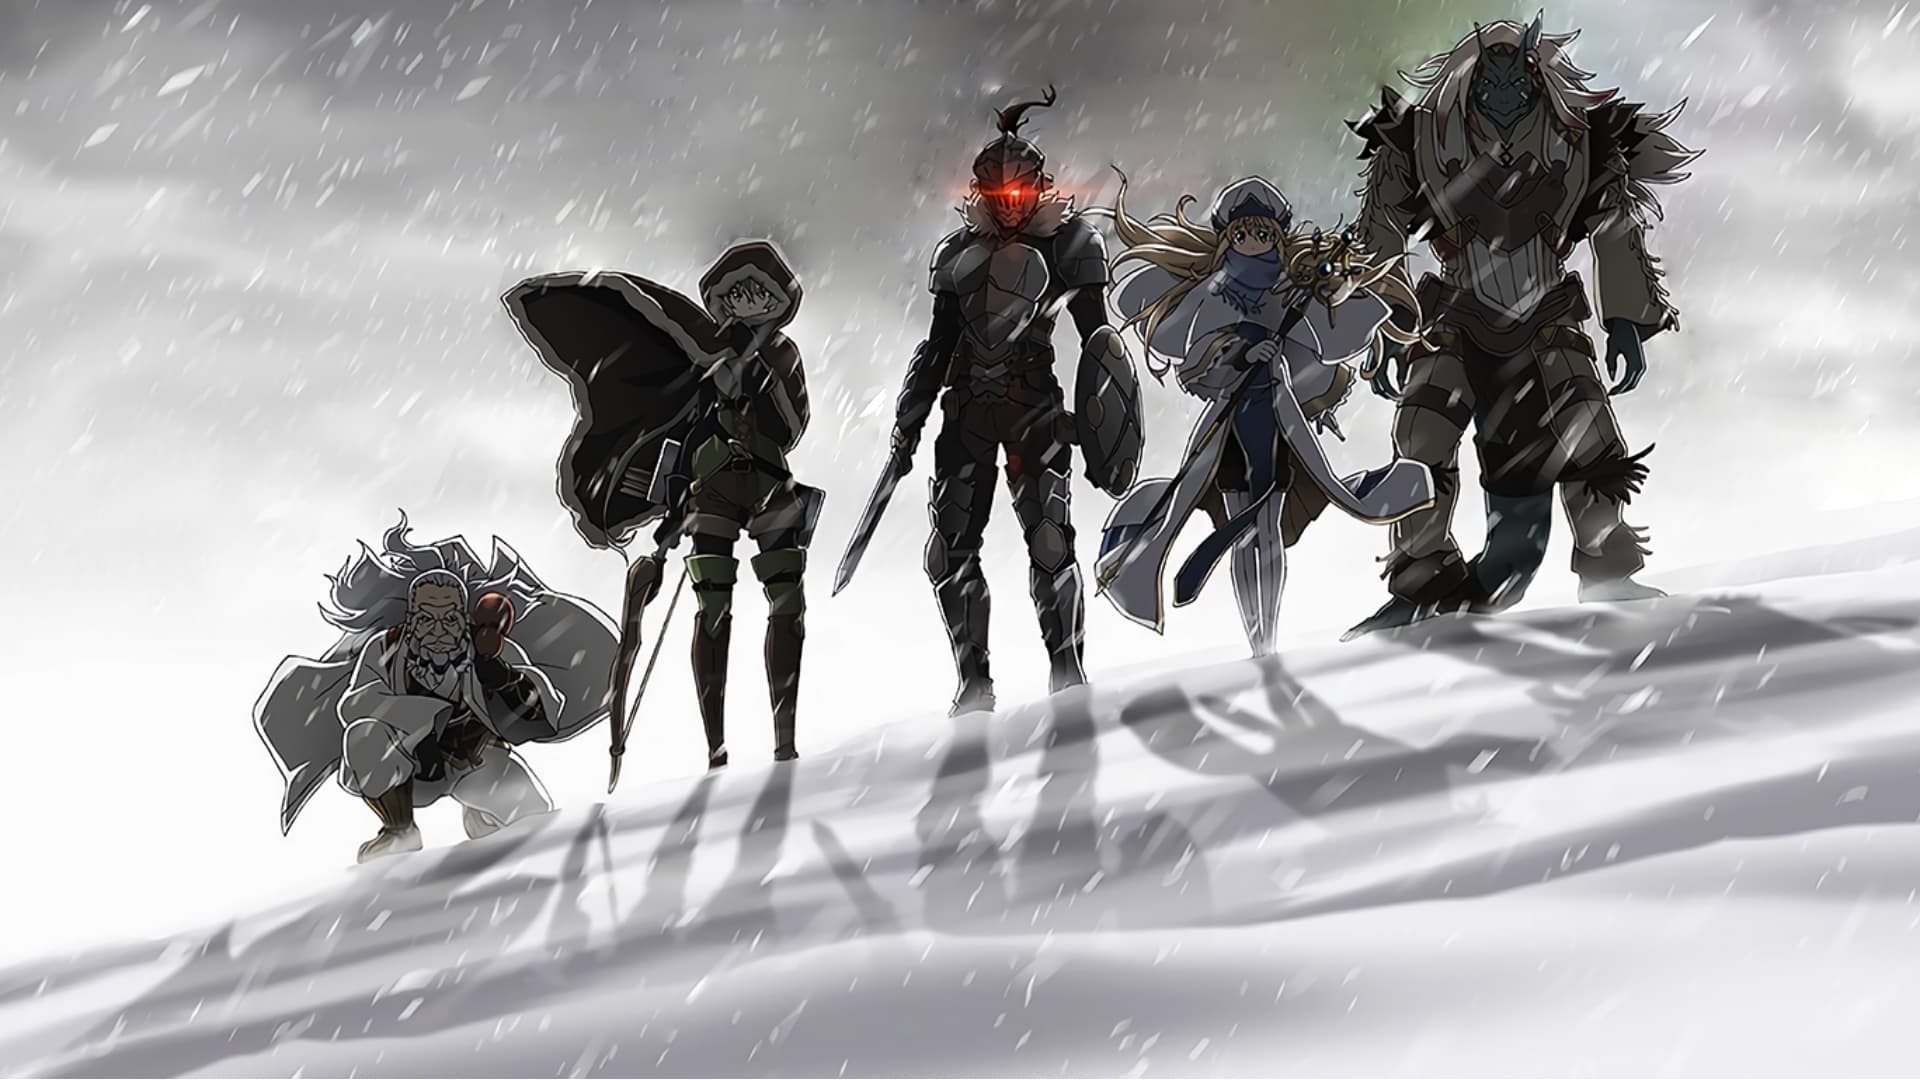 Breaking: 'Goblin Slayer' Returns This Fall! What's New in the 2023 Season?